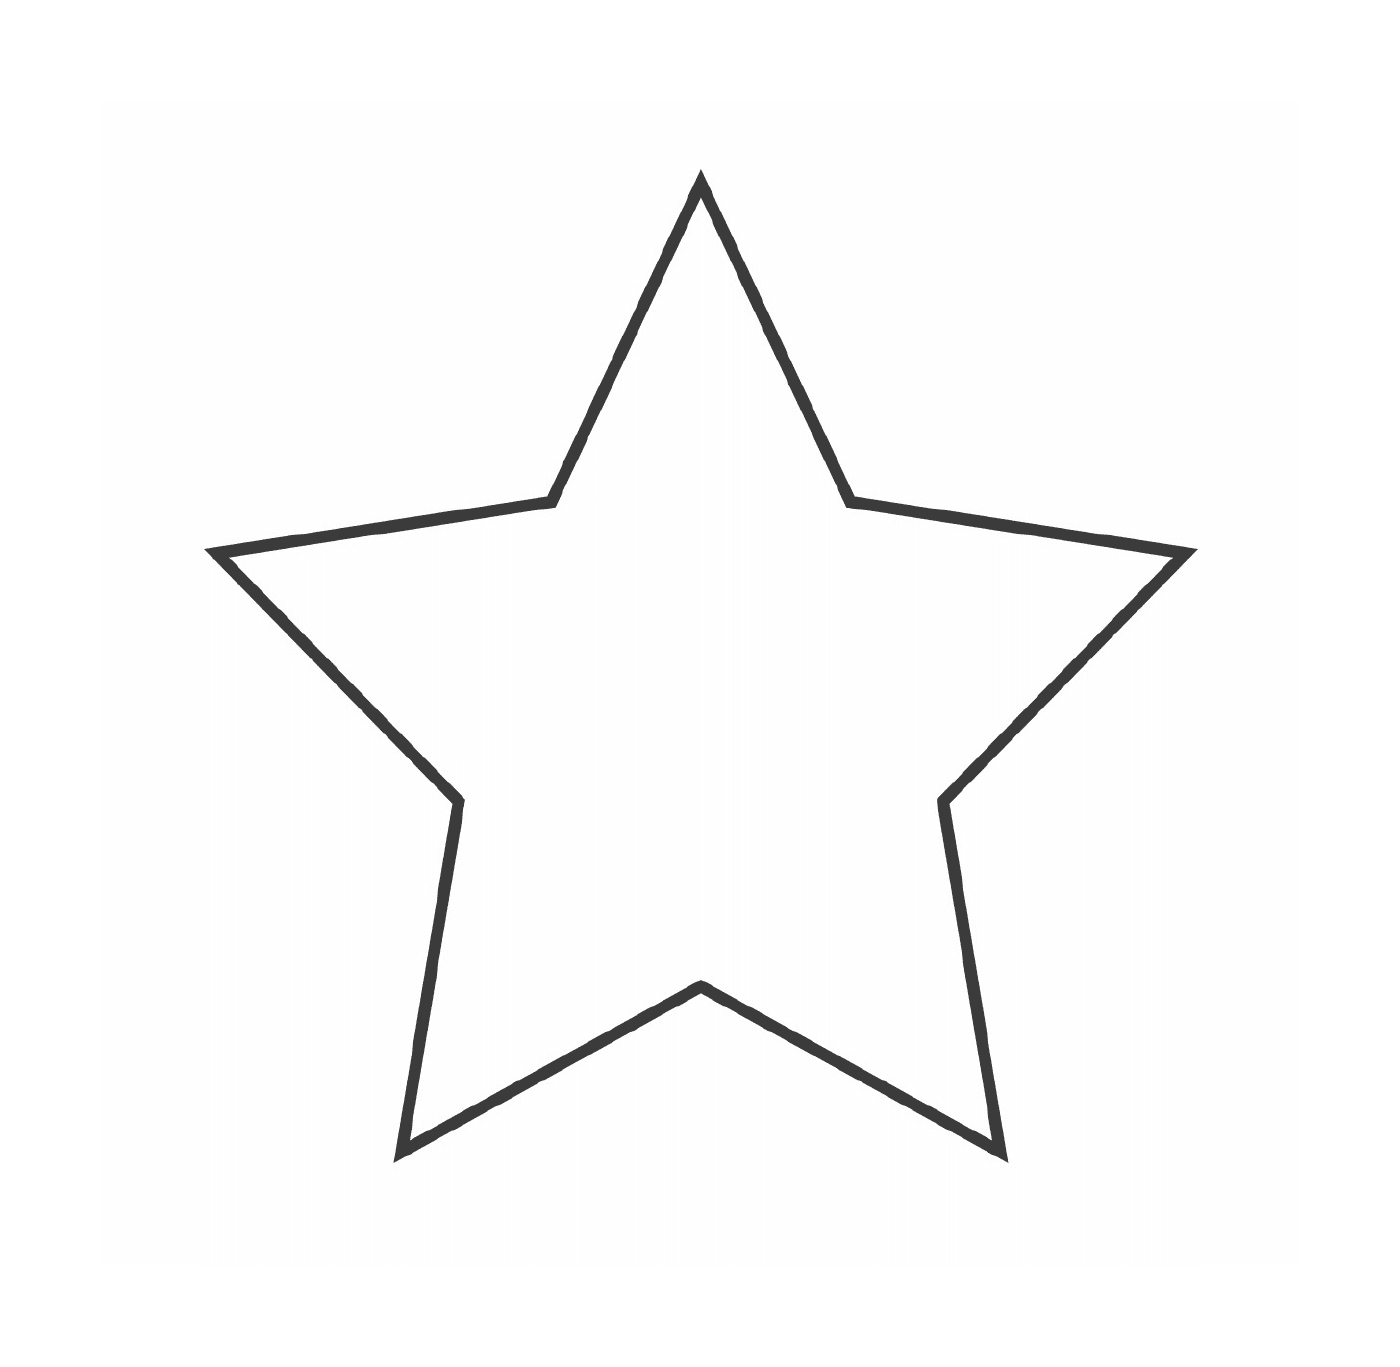  A star with five branches 